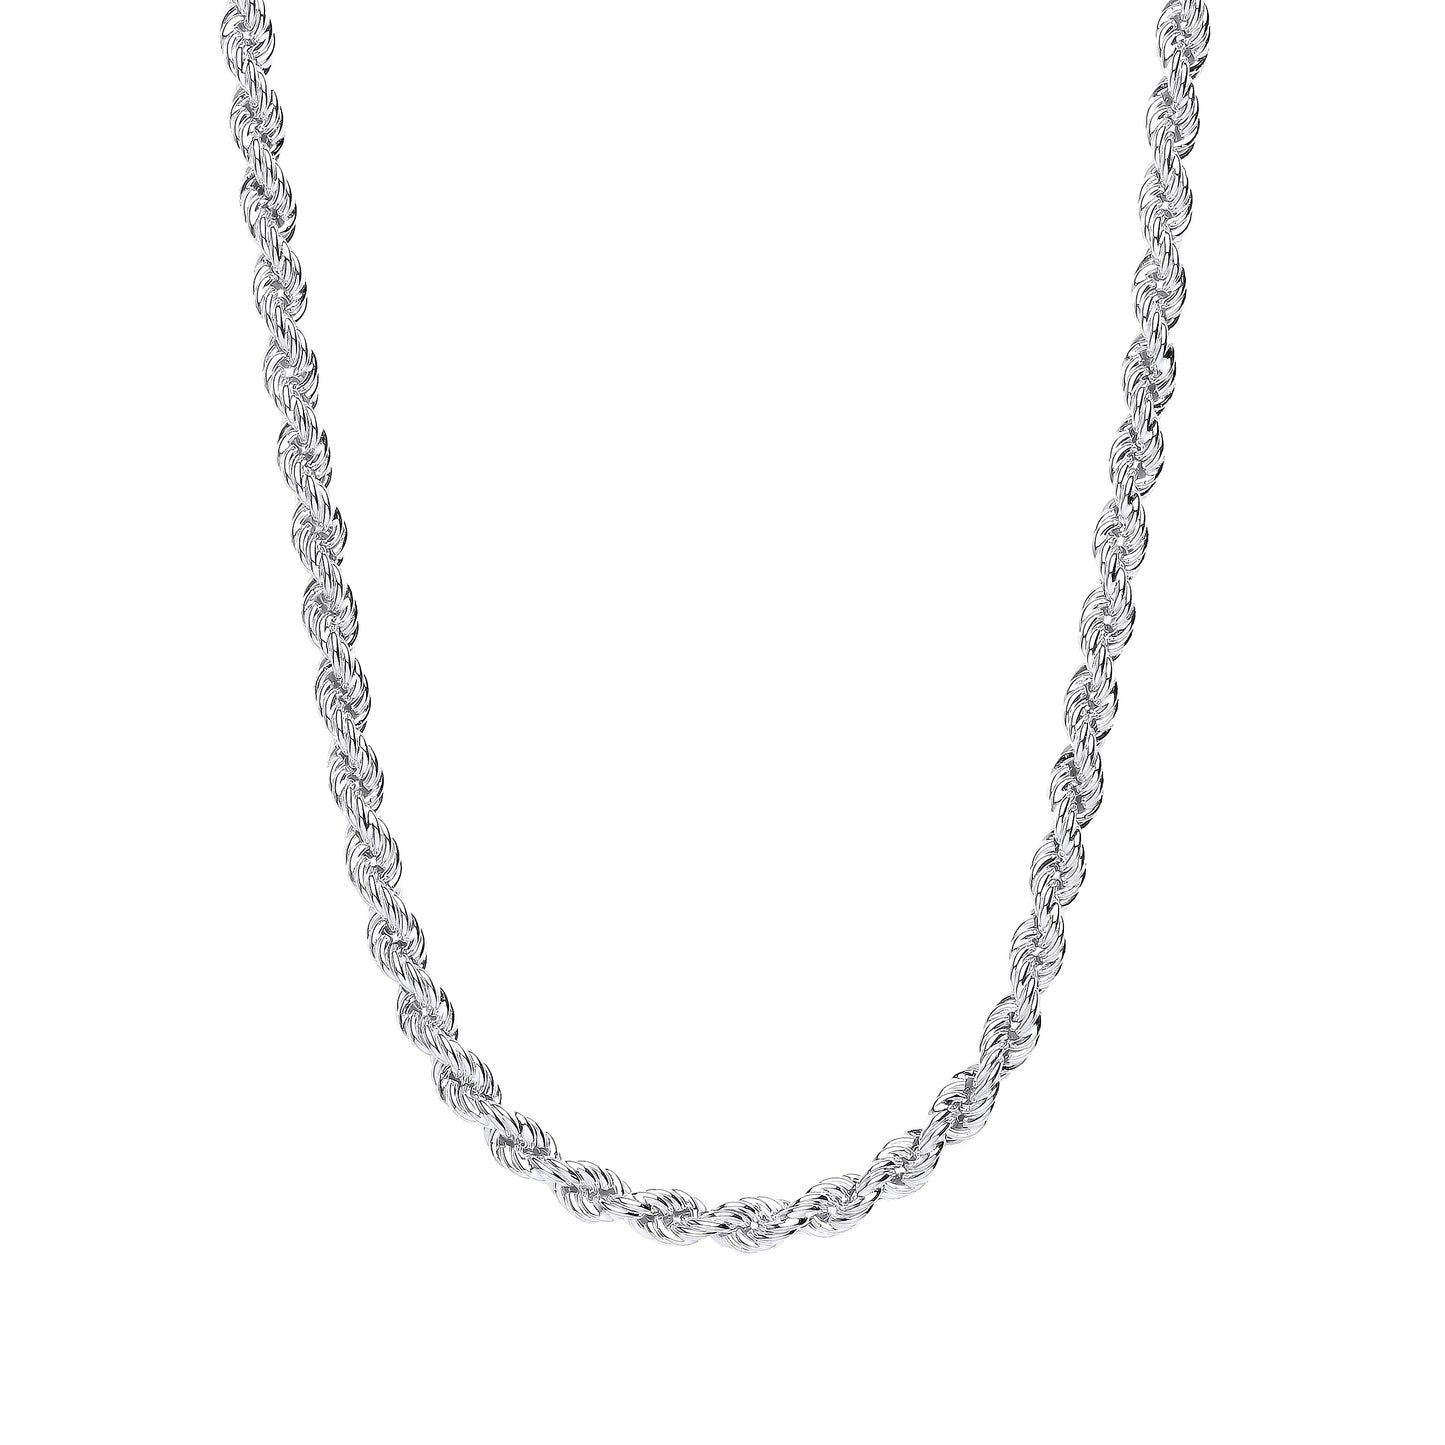 Silver  Hollow Twisted Rope Link Chain Necklace 16" + 2" - GVK433